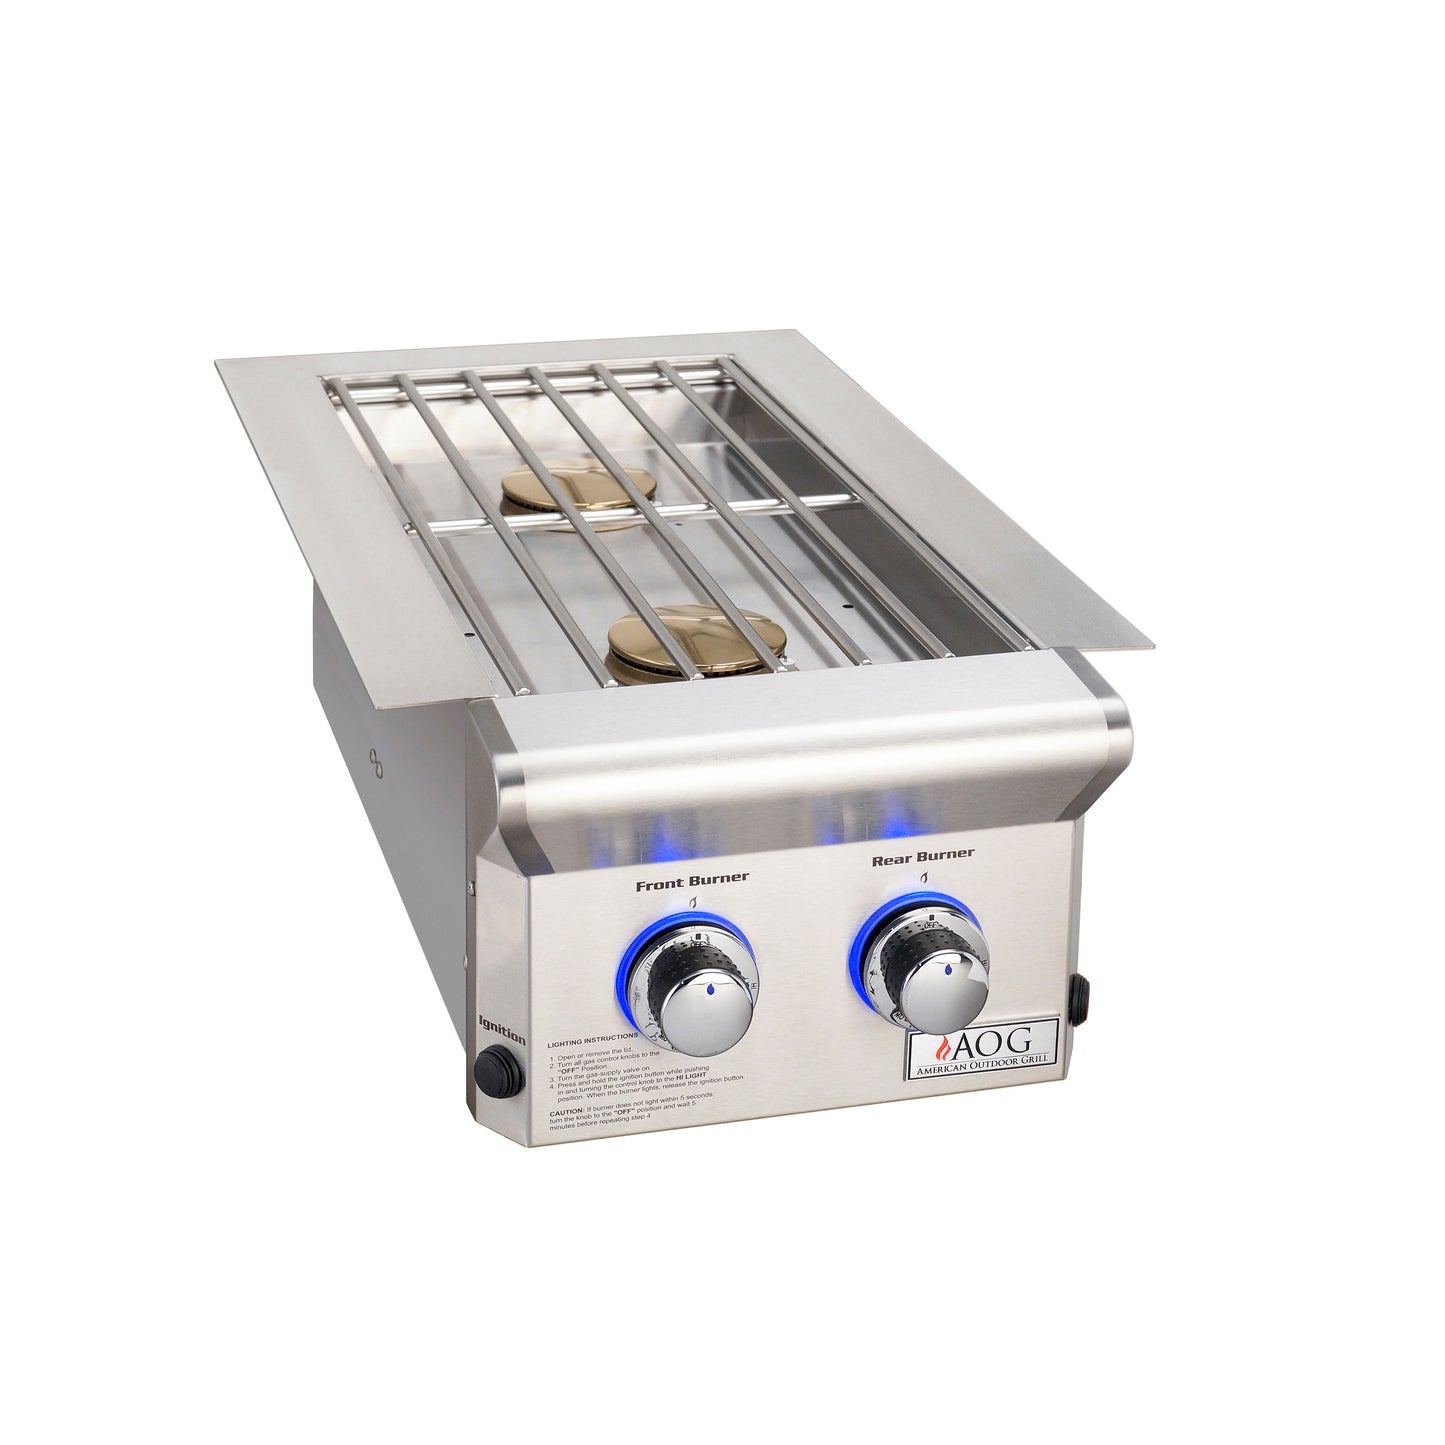 American Outdoor Grill (AOG) Built-In Double Side Burner 25,000 BTU’s (“L” Series) 3282L